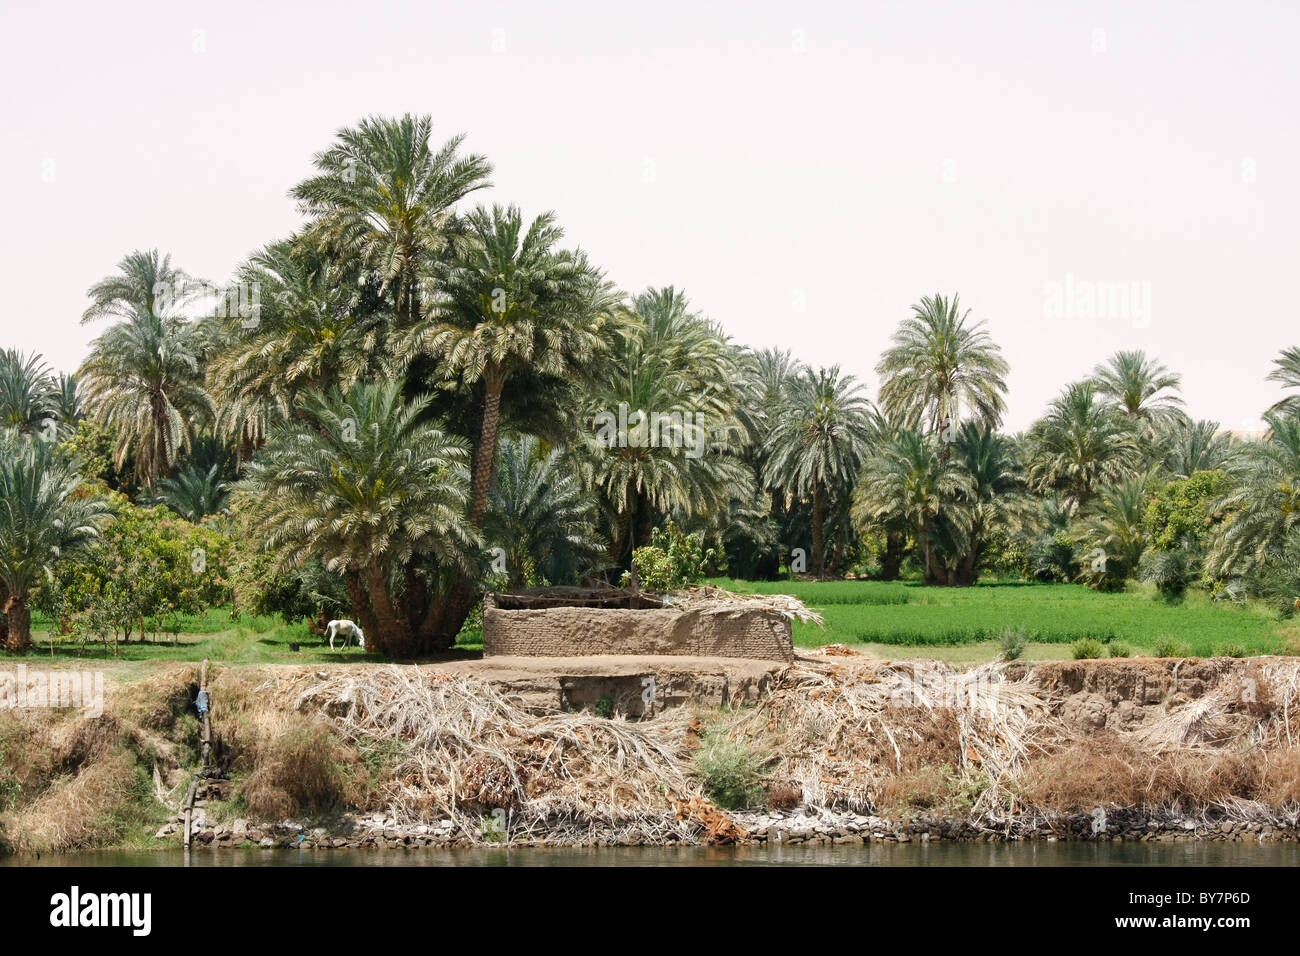 The bank of the River Nile in Egypt, showing the cultivation possible using the Nile's waters. Stock Photo